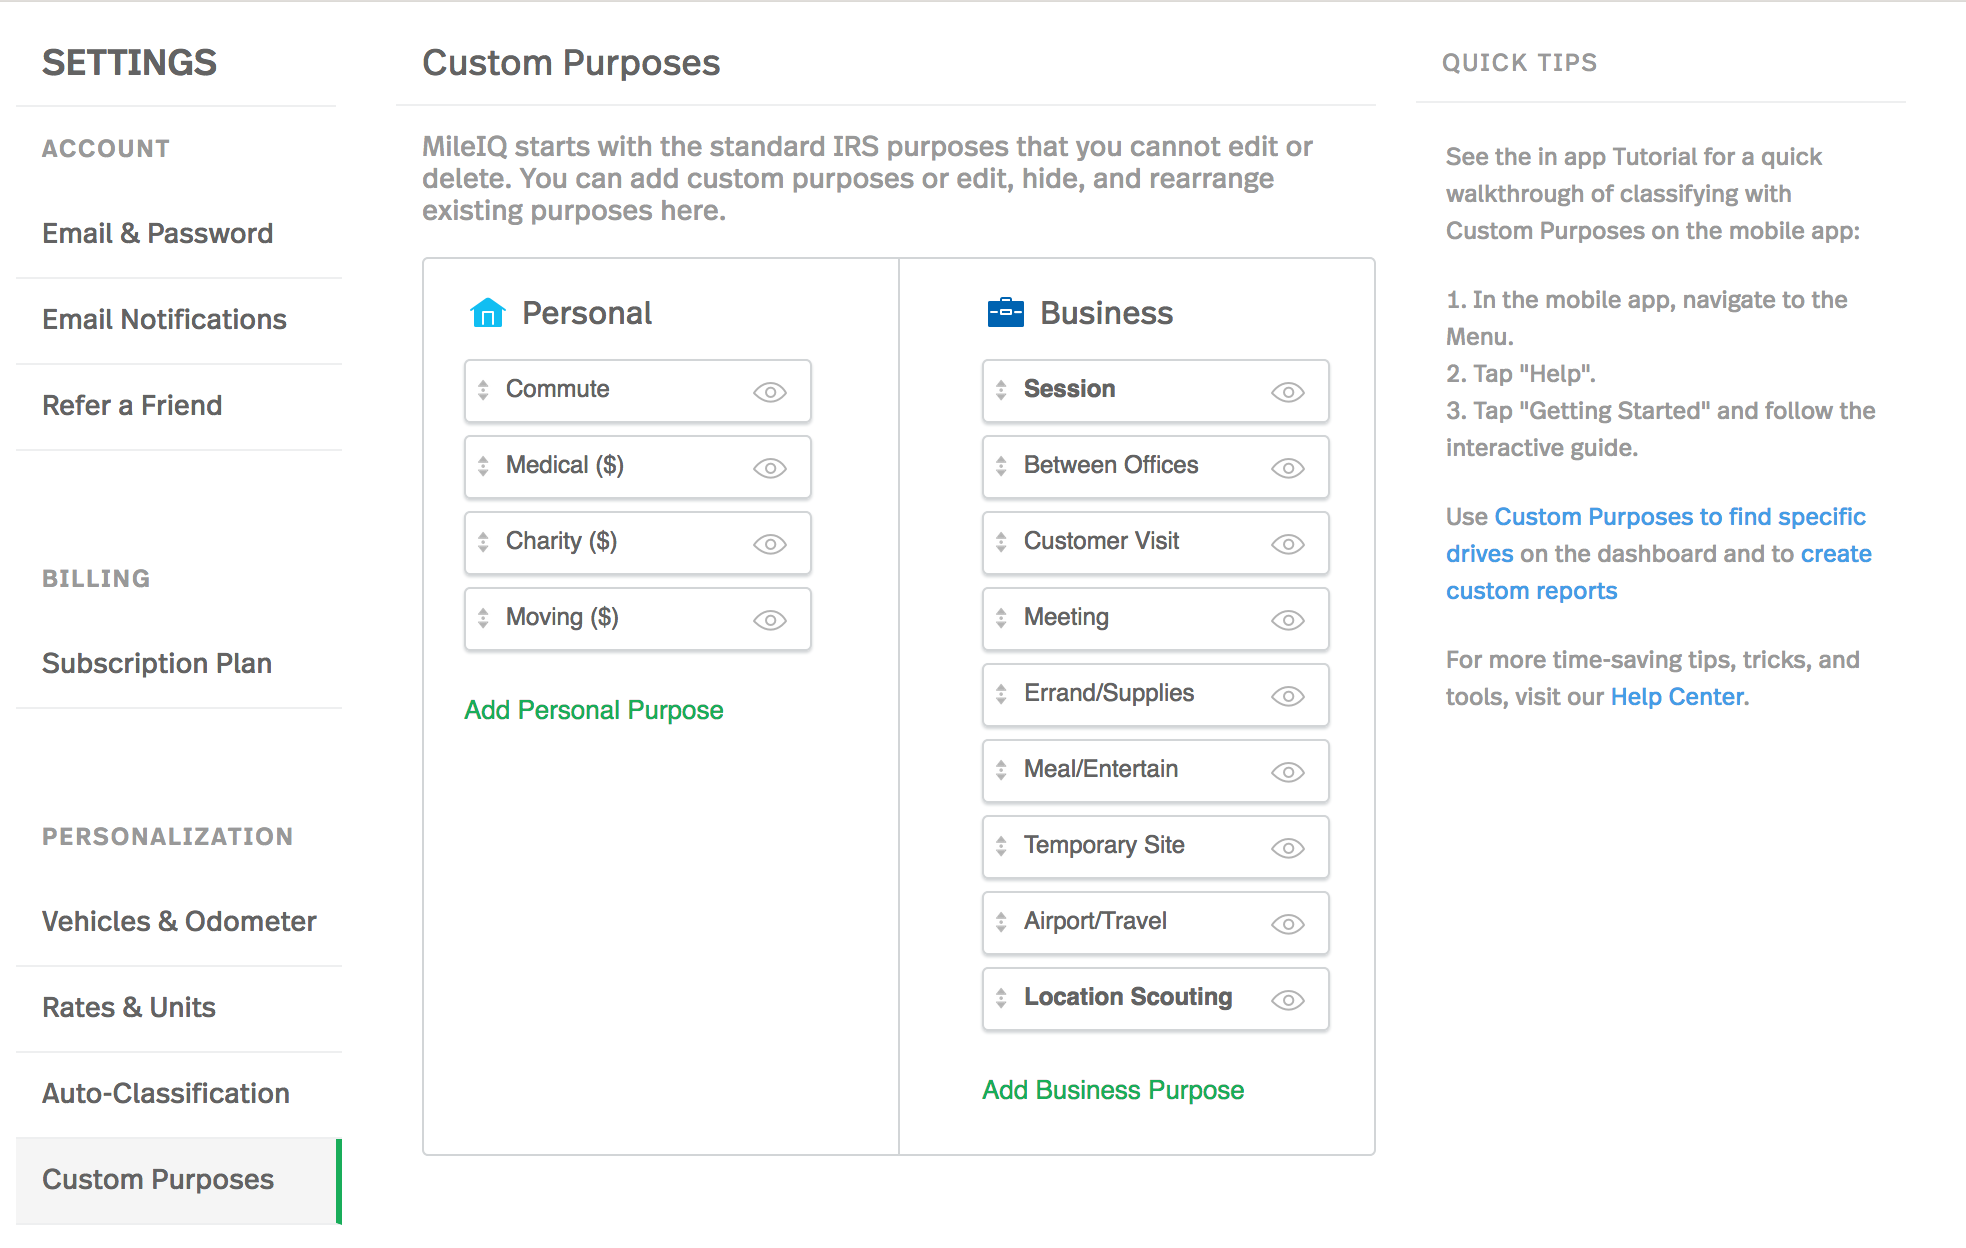 Screenshot of the inside interface of our MileIQ account, under the 'Custom Purposes' section, showing how you can add custom purposes or edit, hide, and rearrange purposes there.